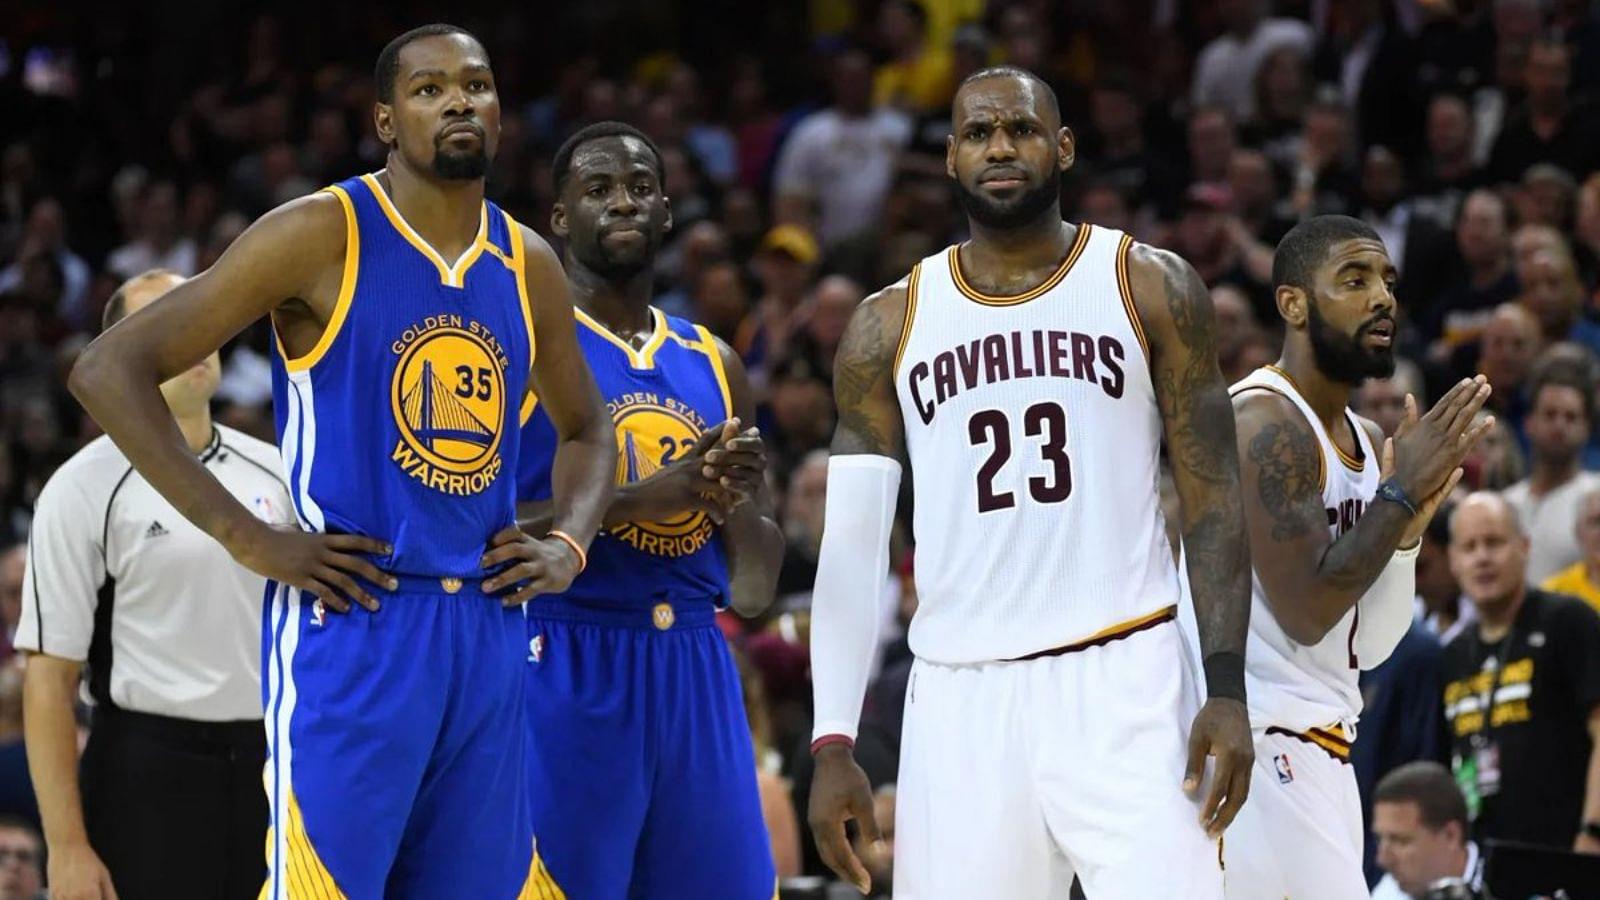 “LeBron James went to a 33 win Cavs and a 35 win Lakers - won rings. KD again wants in on a #1 team!”: NBA Twitter wants the comparison between the 6’9 and 6’10 small forwards to be stopped